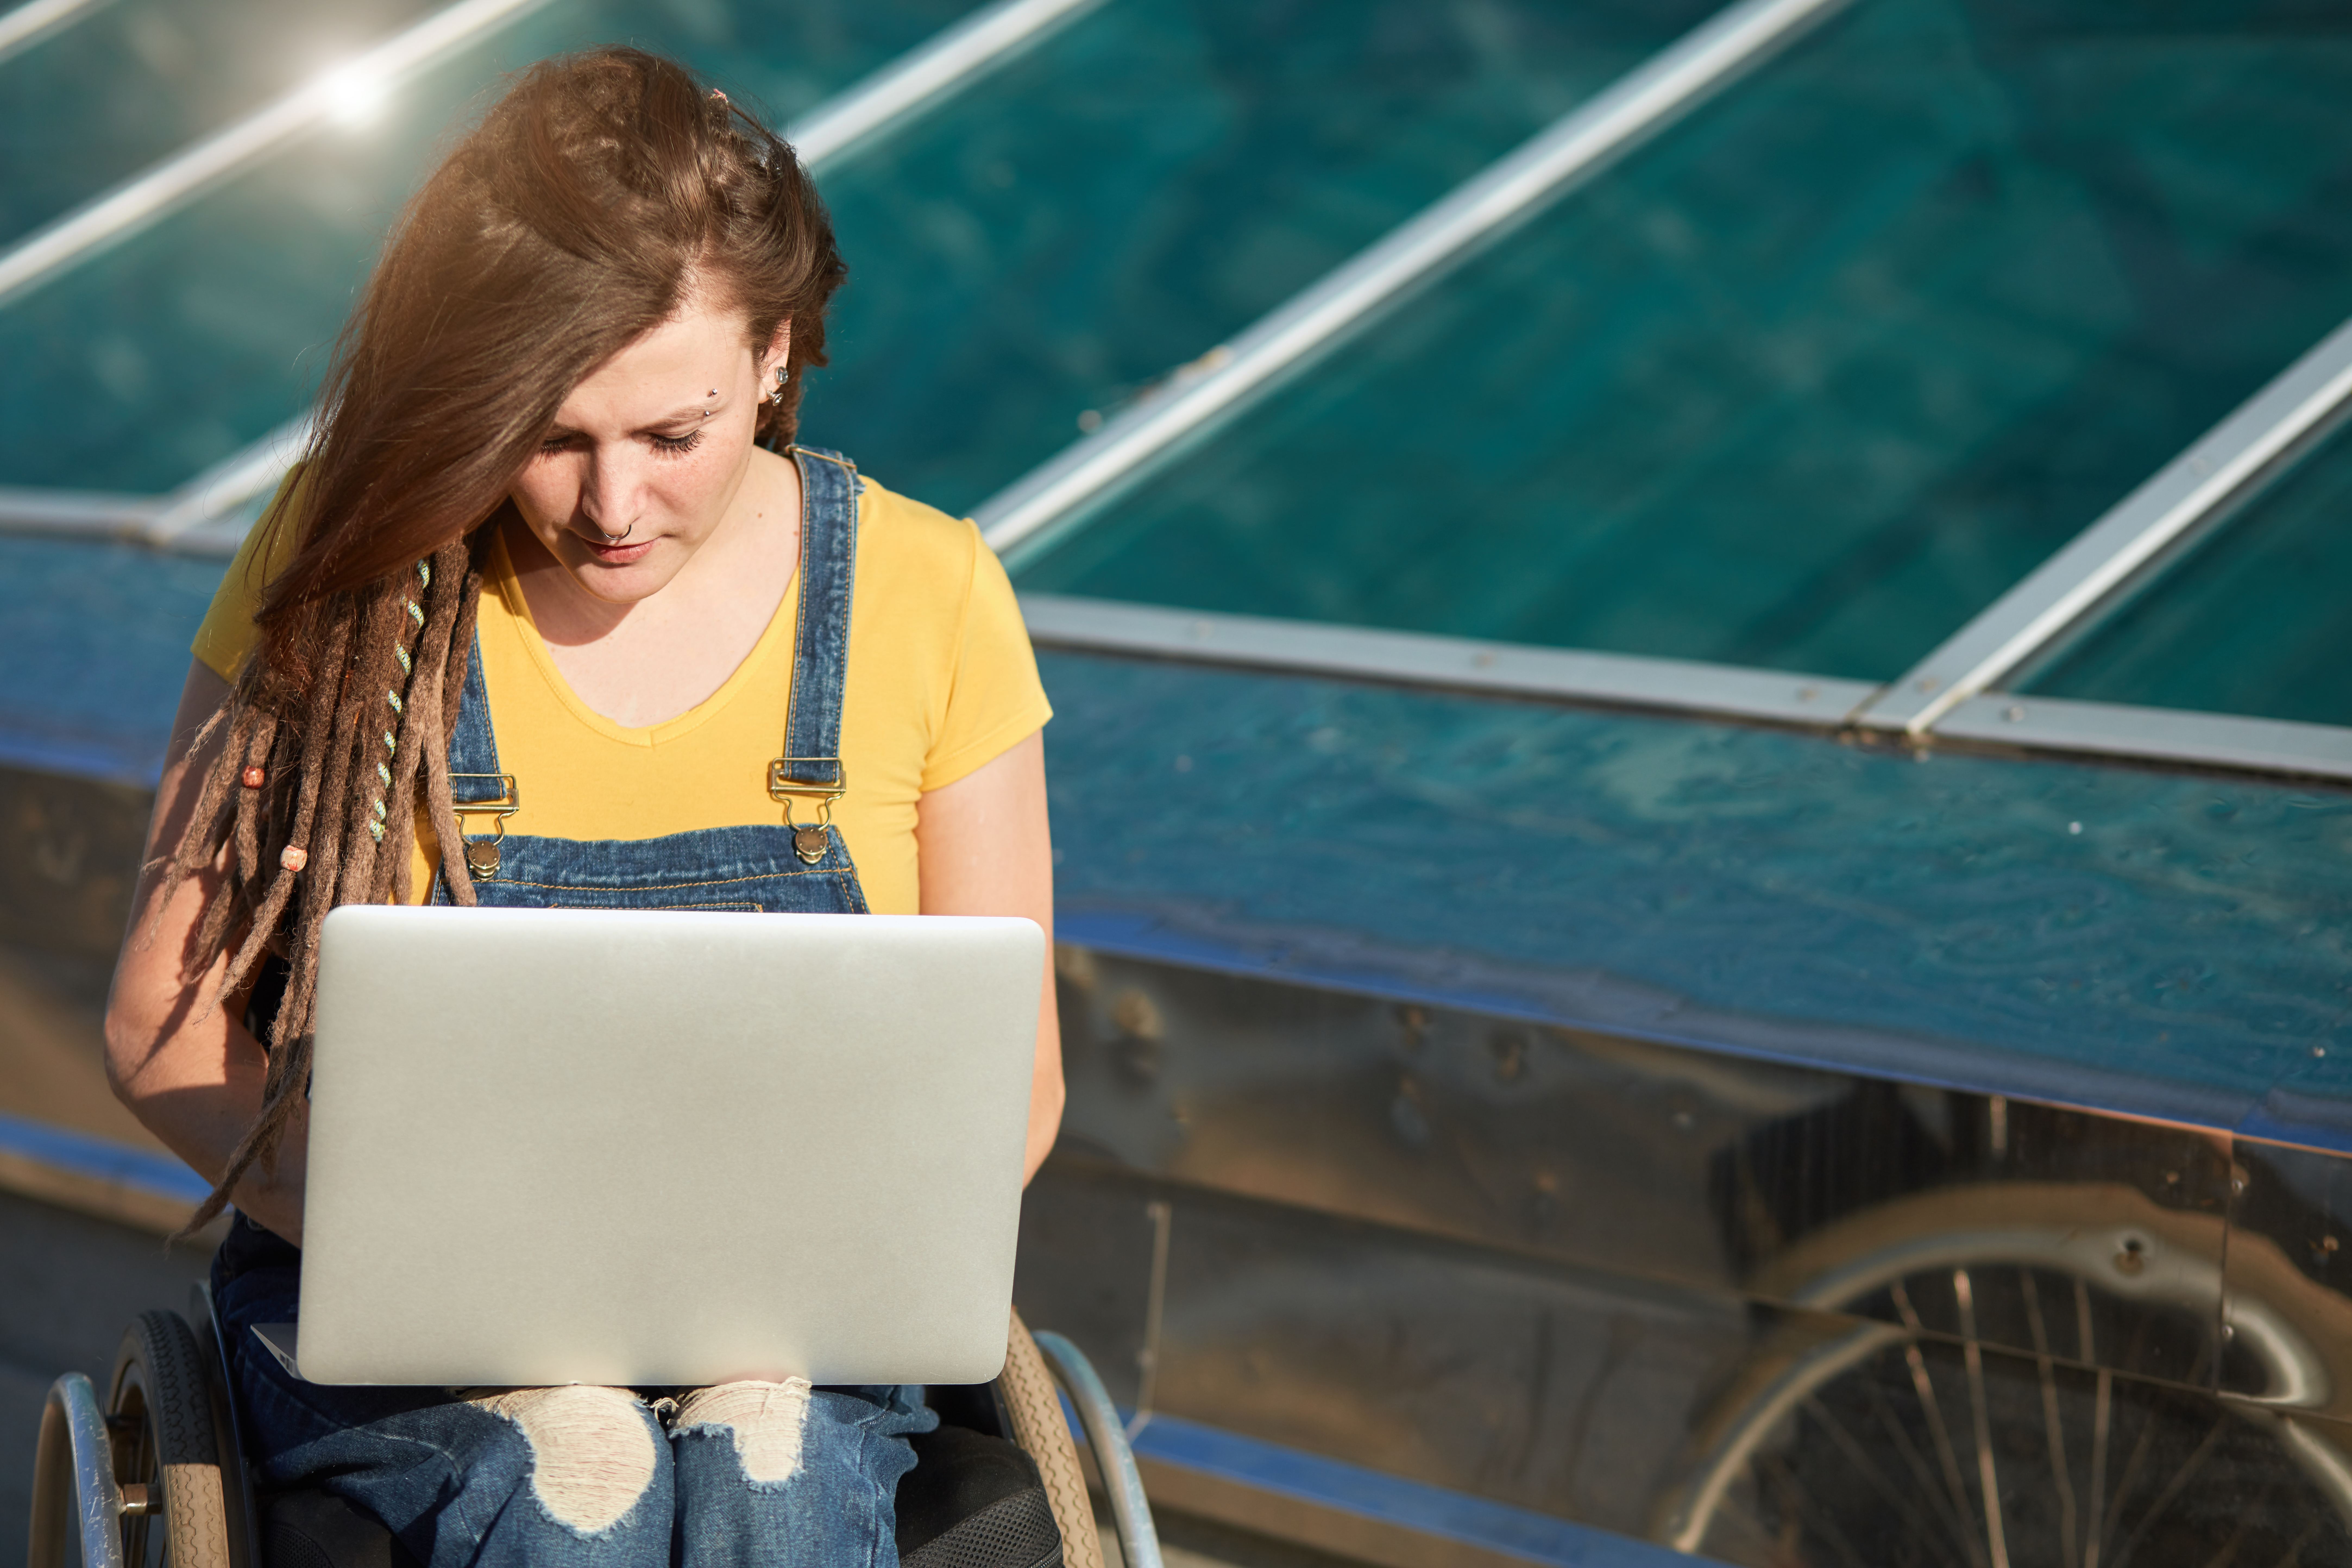 A wheelchair user wearing a yellow shirt and overalls types on a laptop in front of a wall of solar panels.